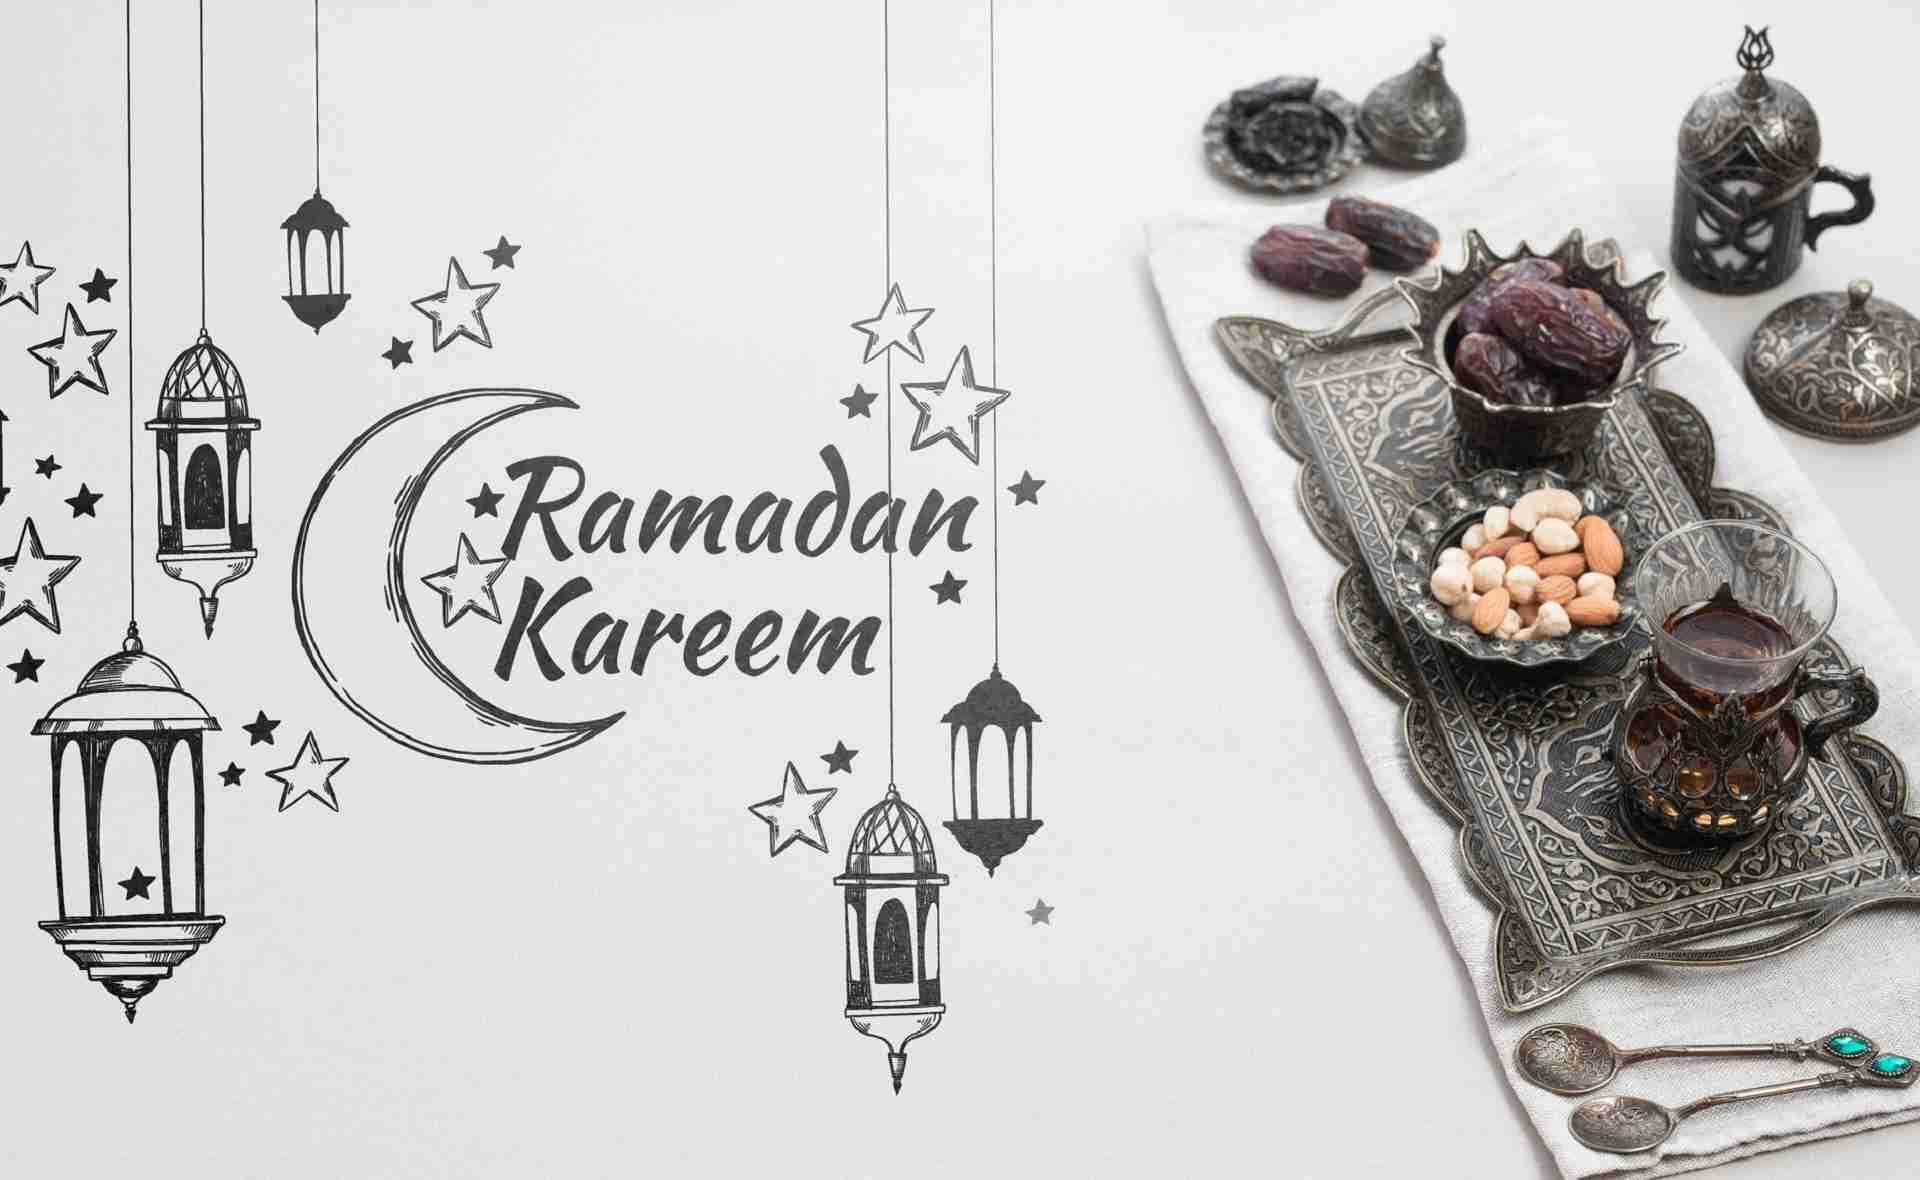 Have a blessed Ramadan